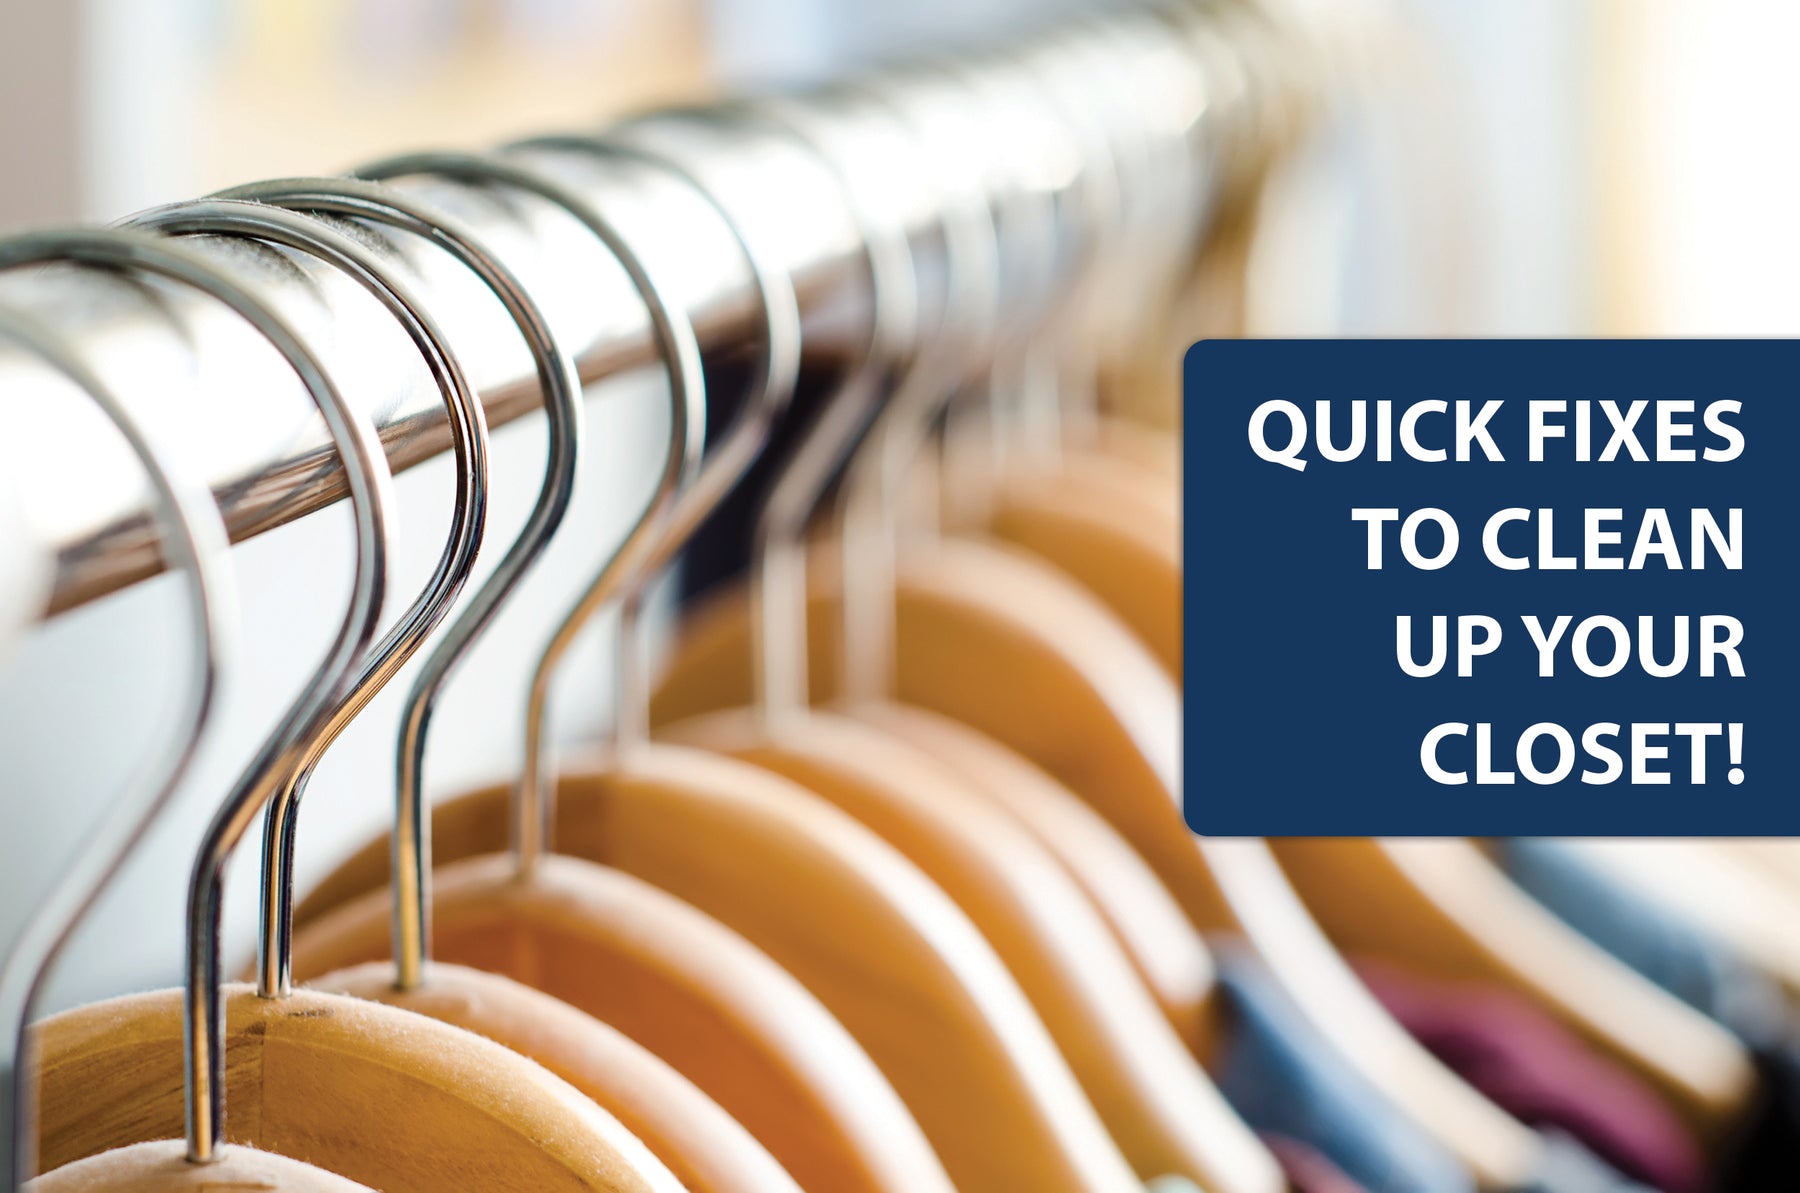 Clean Up Your Closet With These Quick Fixes!